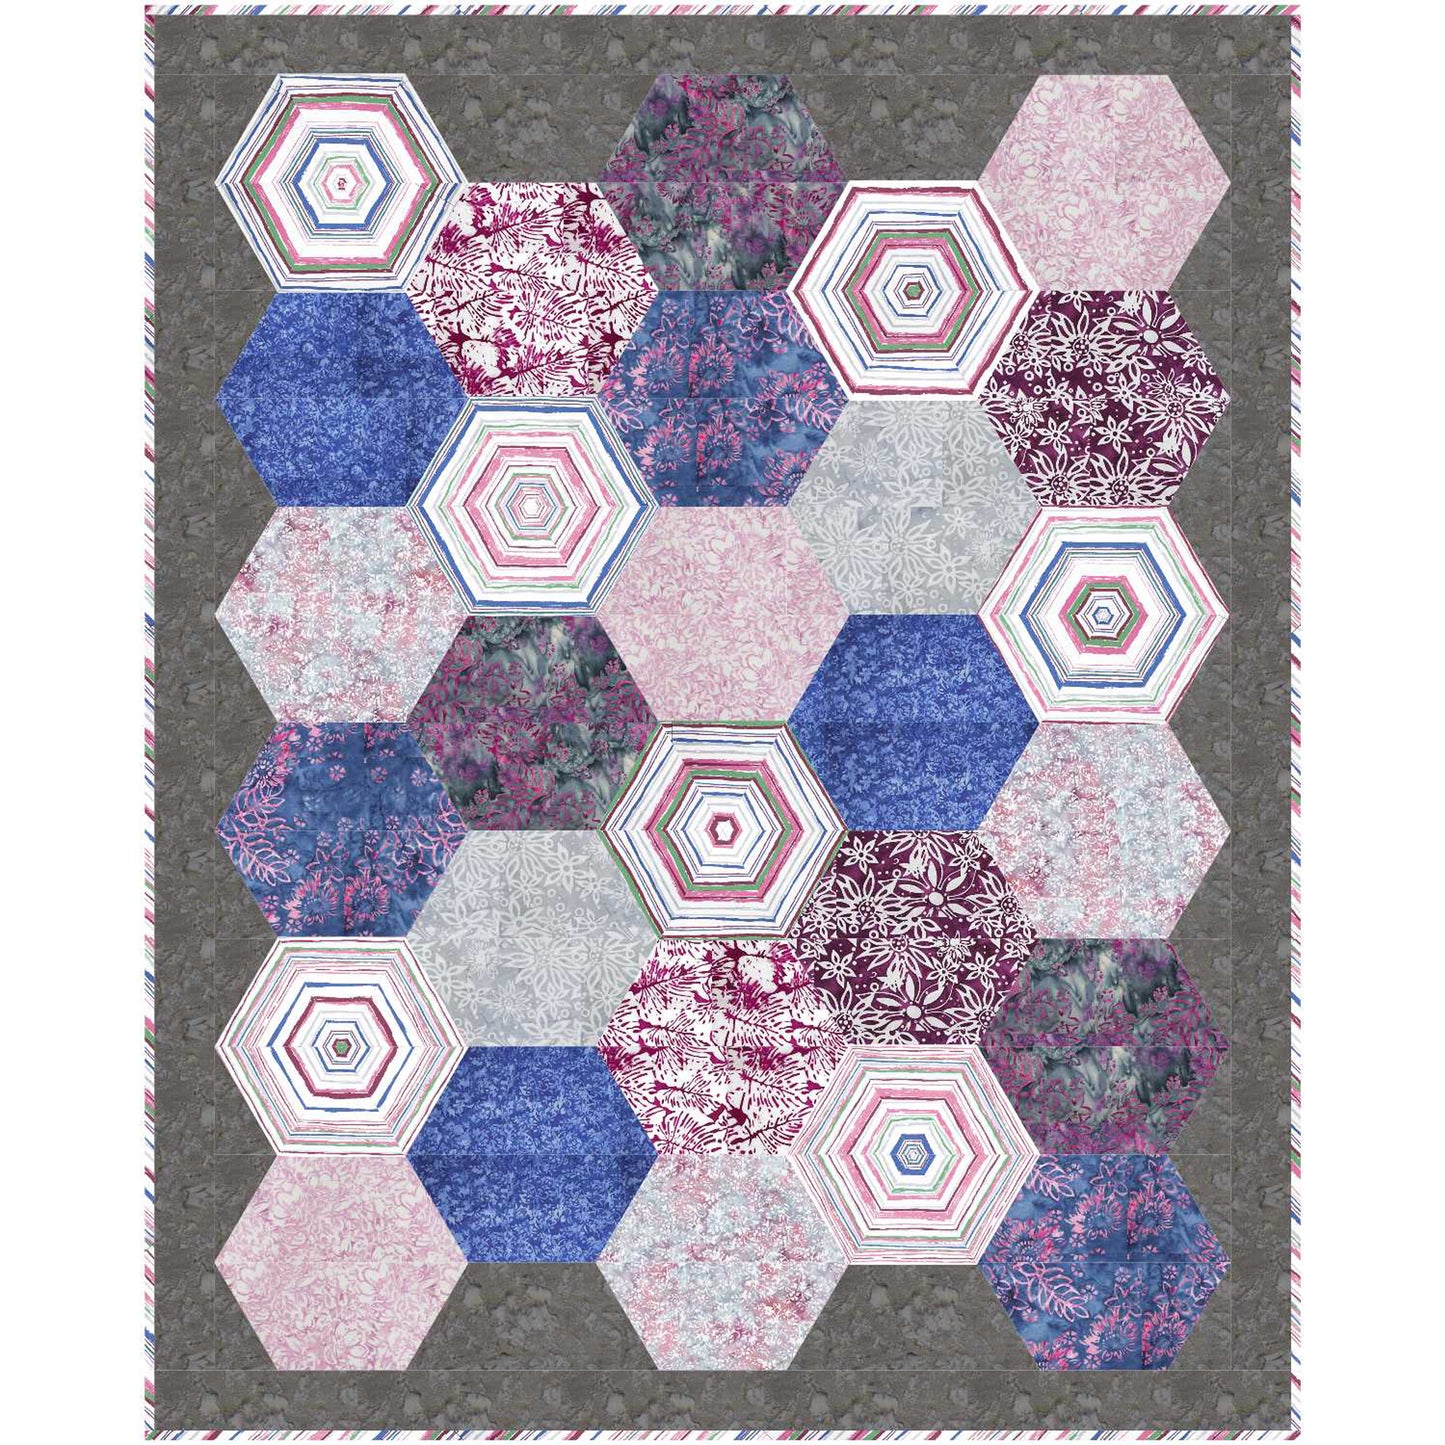 Quilt with purple and pink hexagon design.